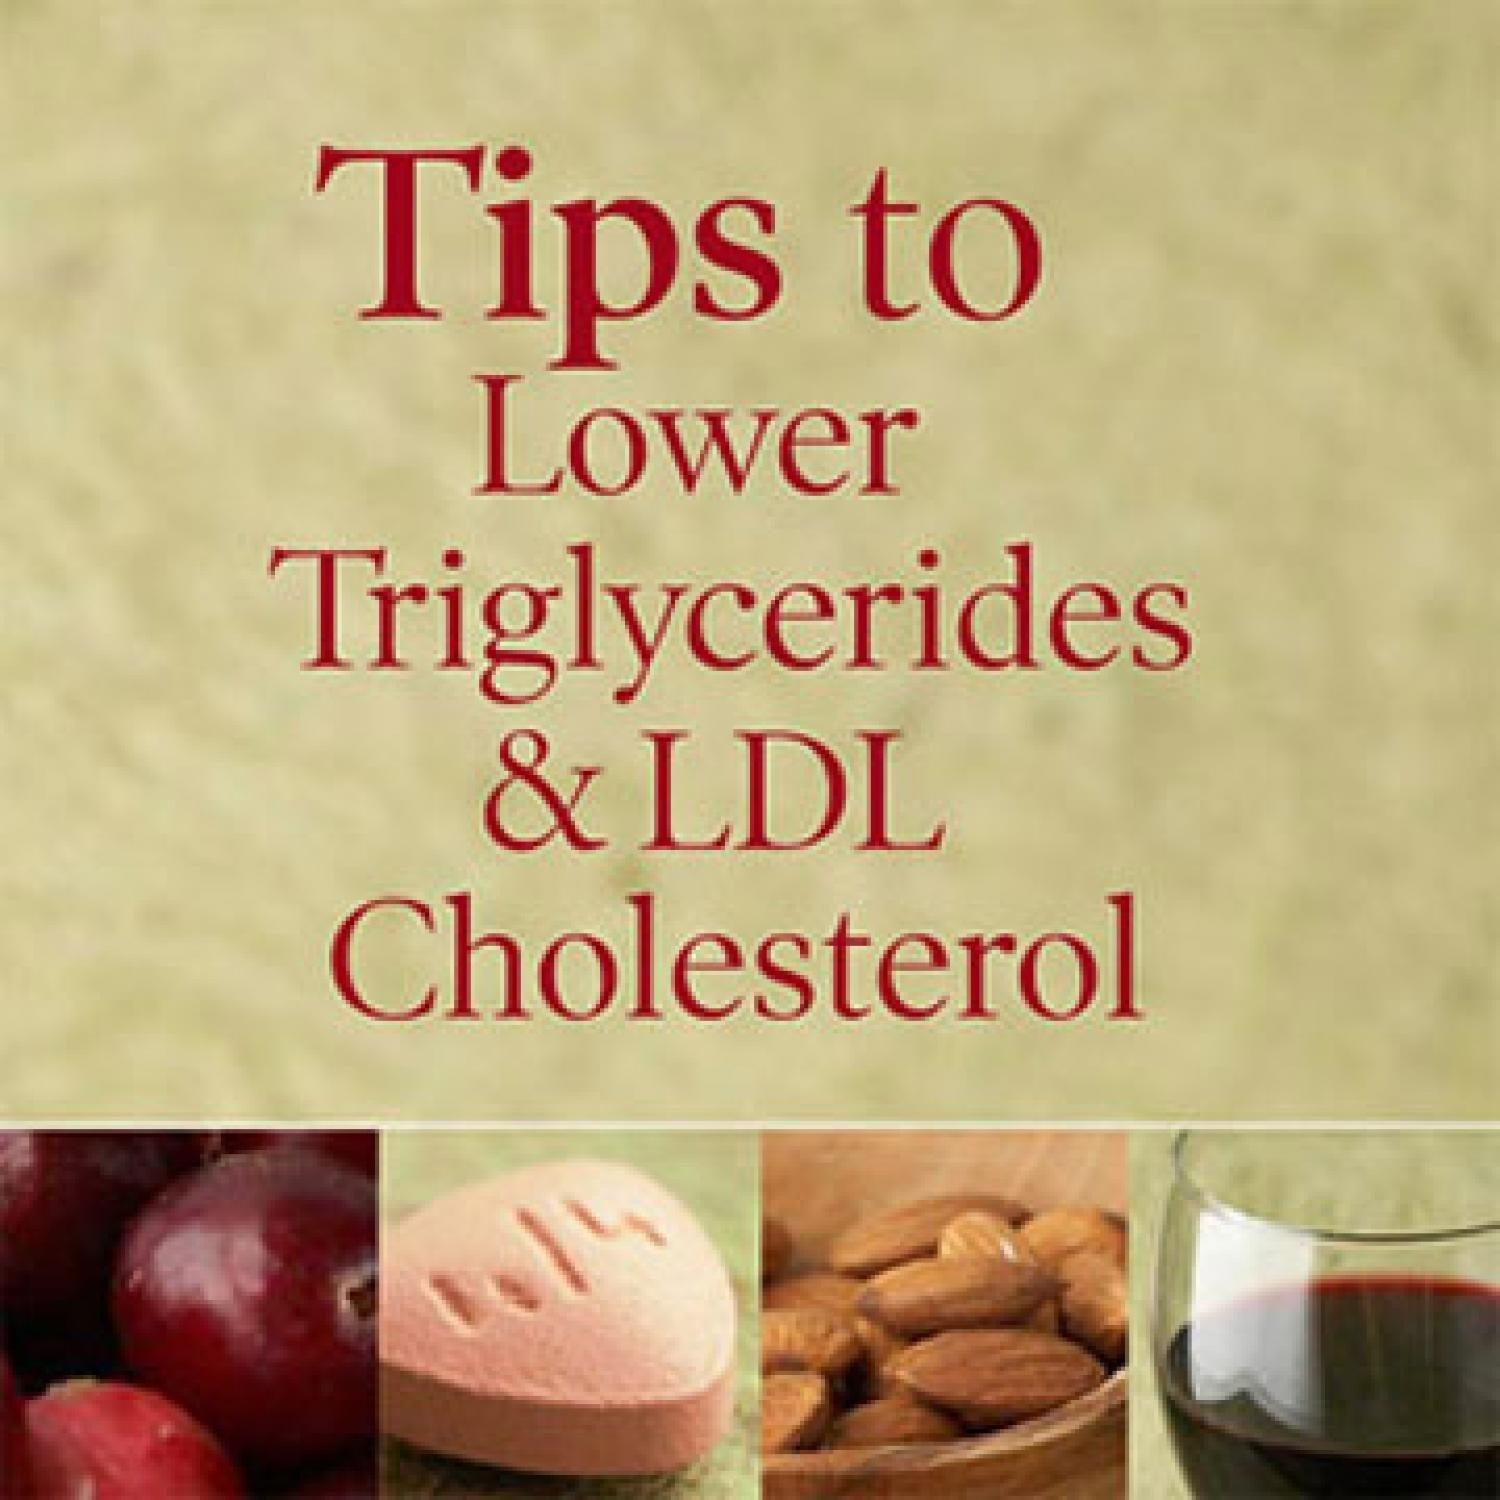 Best Diet To Lower Cholesterol And Blood Sugar